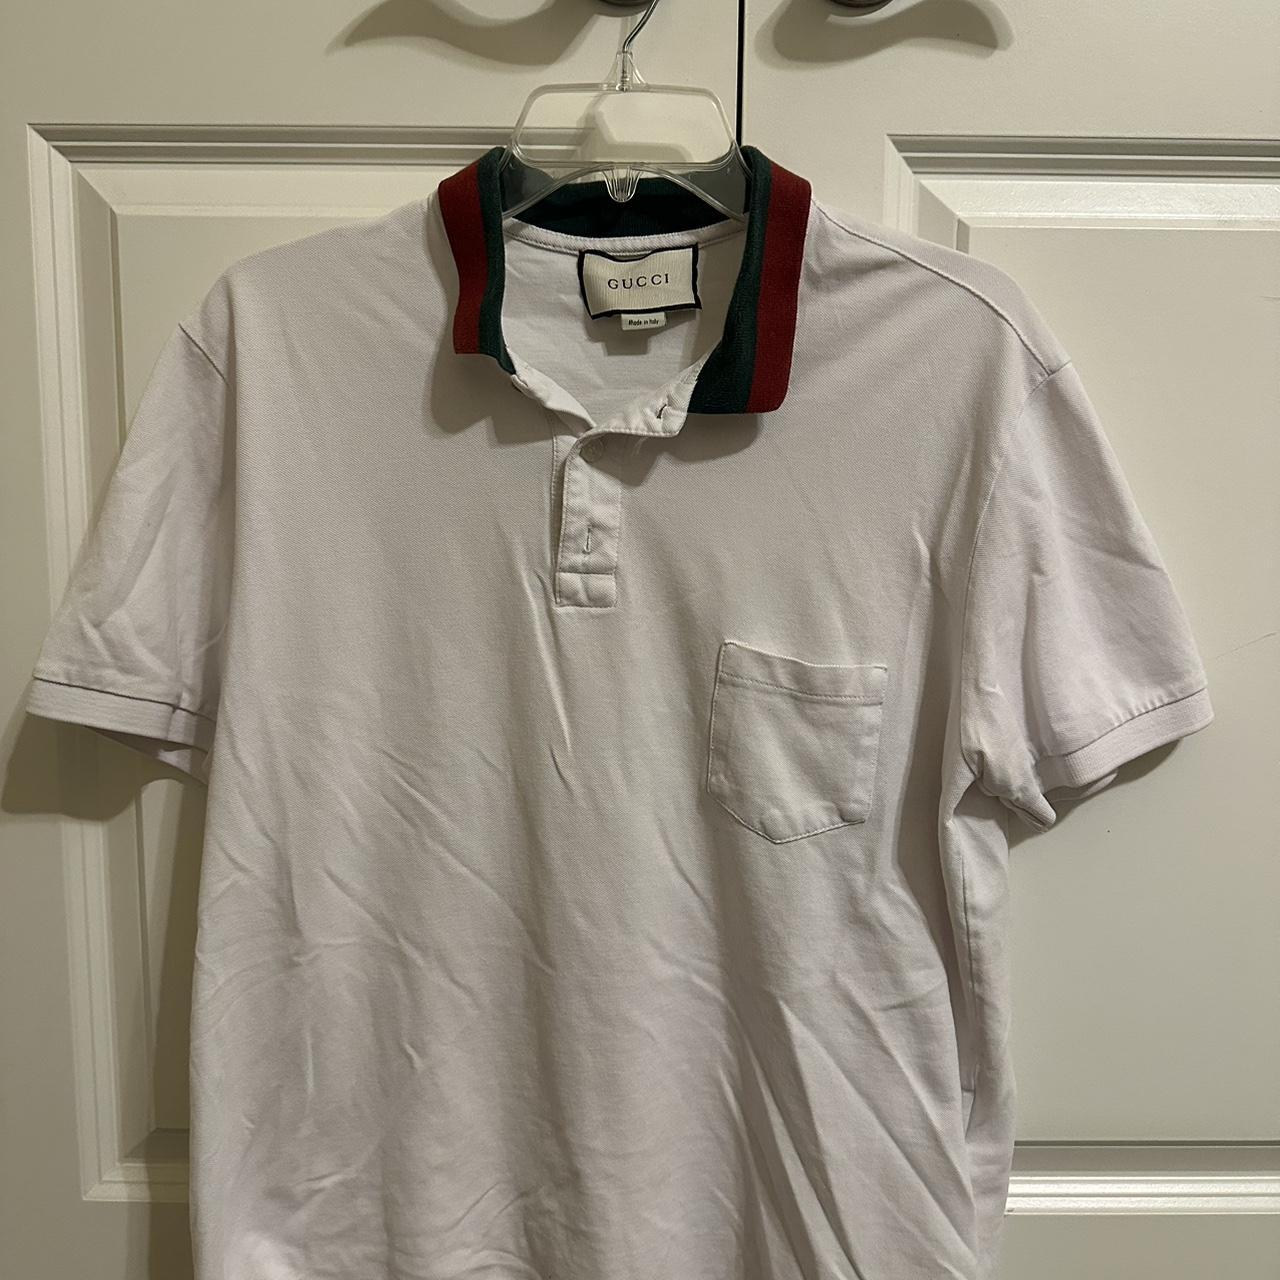 Gucci Polo shrunk from washing, says XL but fits... - Depop